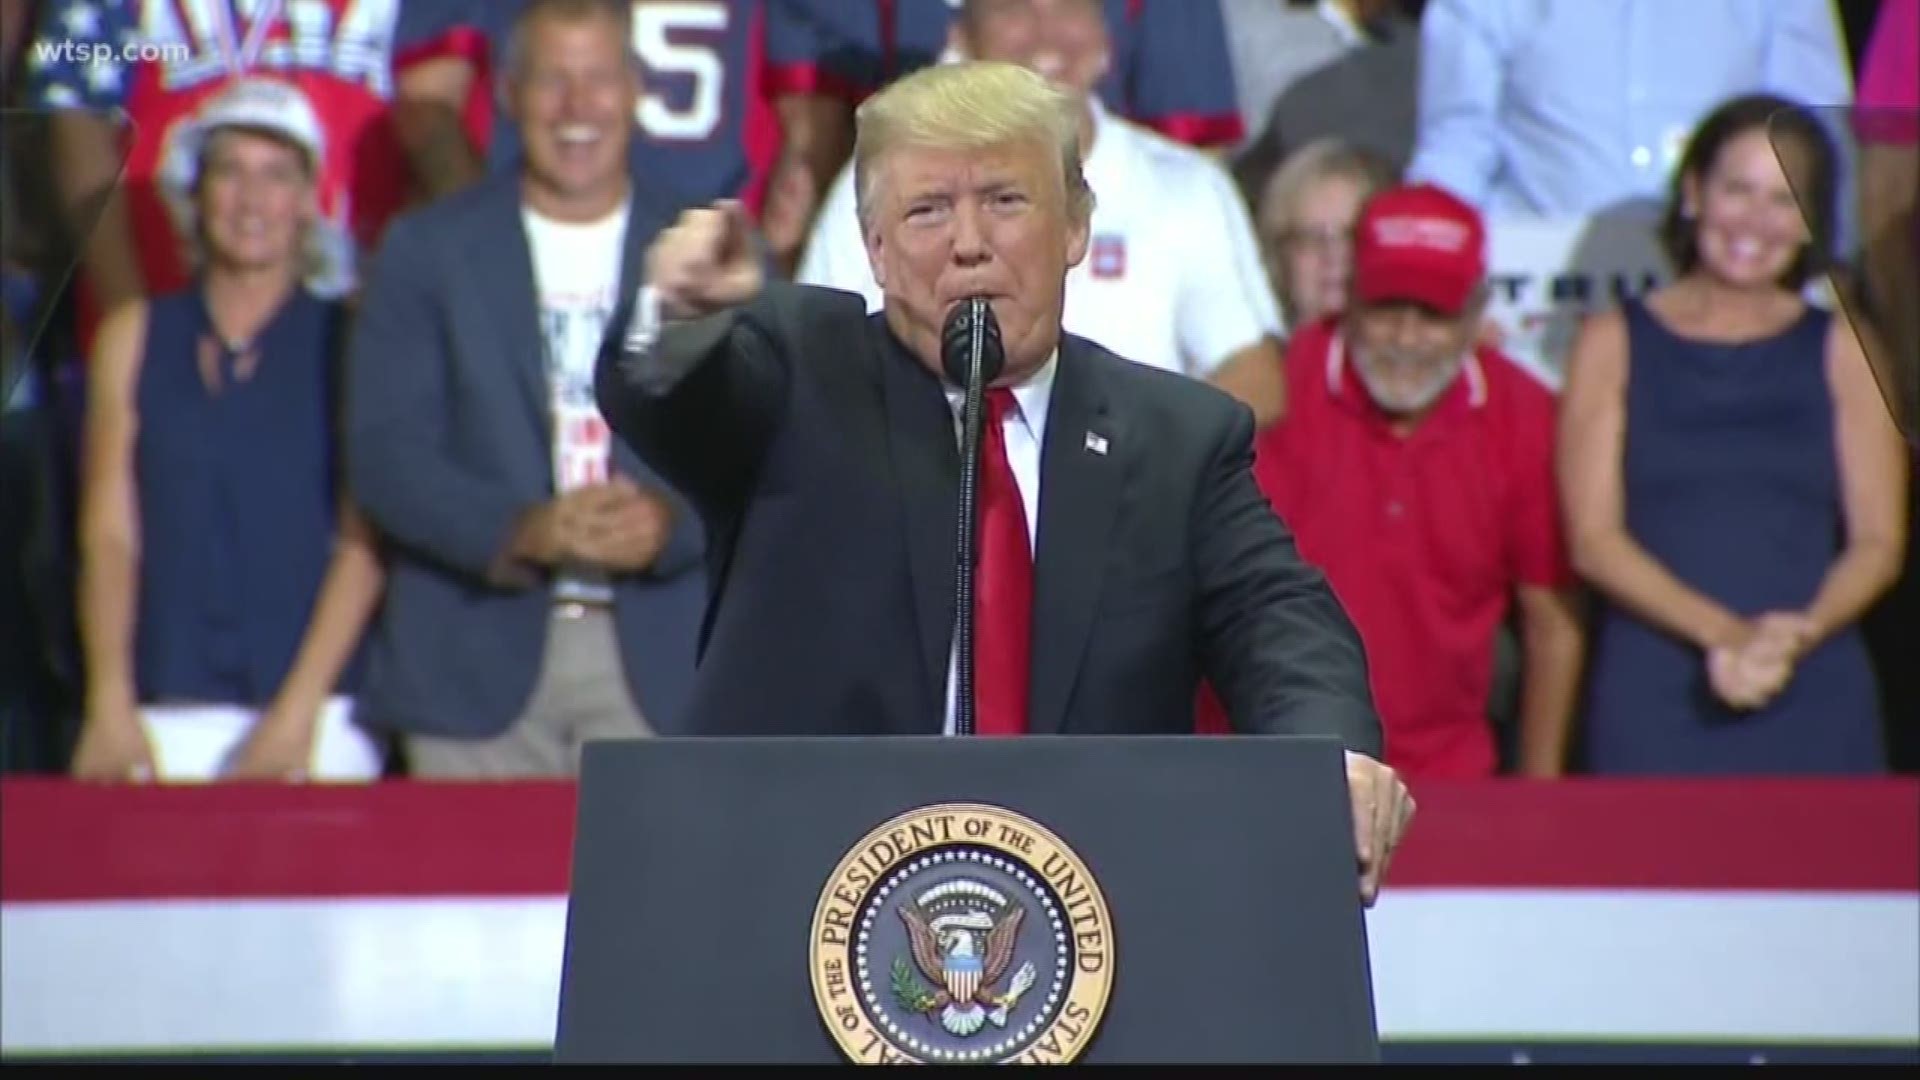 Present Trump is in Florida Tuesday, officially launching his 2020 reelection campaign. 

The President could have done that from anywhere. In fact, President Obama did it online. 

So, why a huge political rally in Orlando?

Experts say Republicans and Democrats are already focusing their 

“I mean, Florida is the jackpot again for the 2020 elections,” said 10News Political Expert Lars Hafner. “And we are going to be starting with President Trump coming to town.”

Political watchers say the Trump campaign’s decision to officially launch a re-election bid in Orlando is no coincidence. Nor is the Democrats’ decision to hold their first big debate a few days later in Miami.